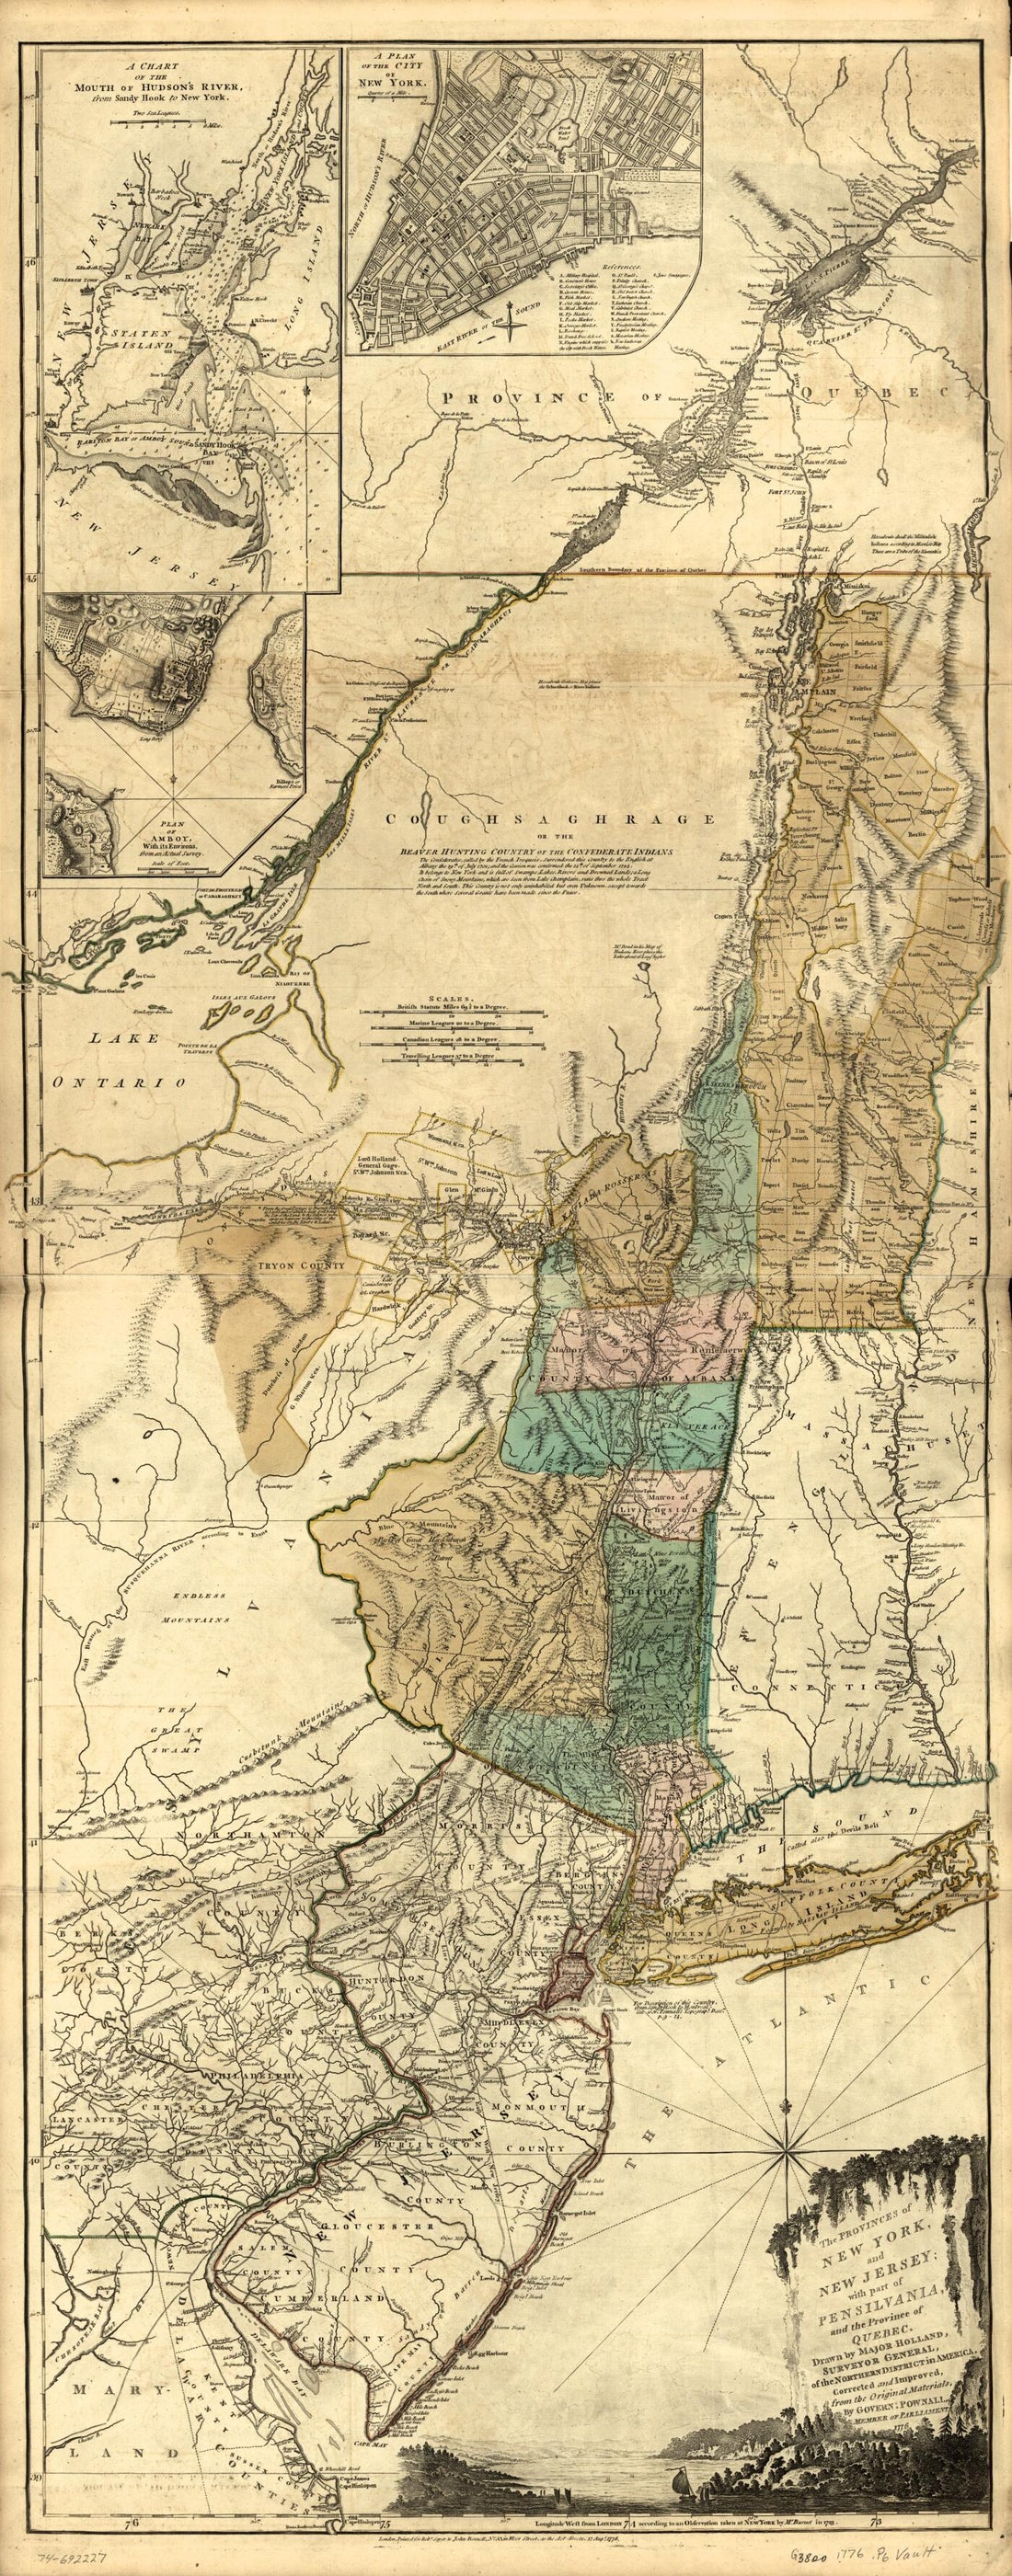 This old map of The Provinces of New York and New Jersey; With Part of Pensilvania, and the Province of Quebec from 1776 was created by Samuel Holland, Thomas Pownall,  Robert Sayer and John Bennett (Firm) in 1776